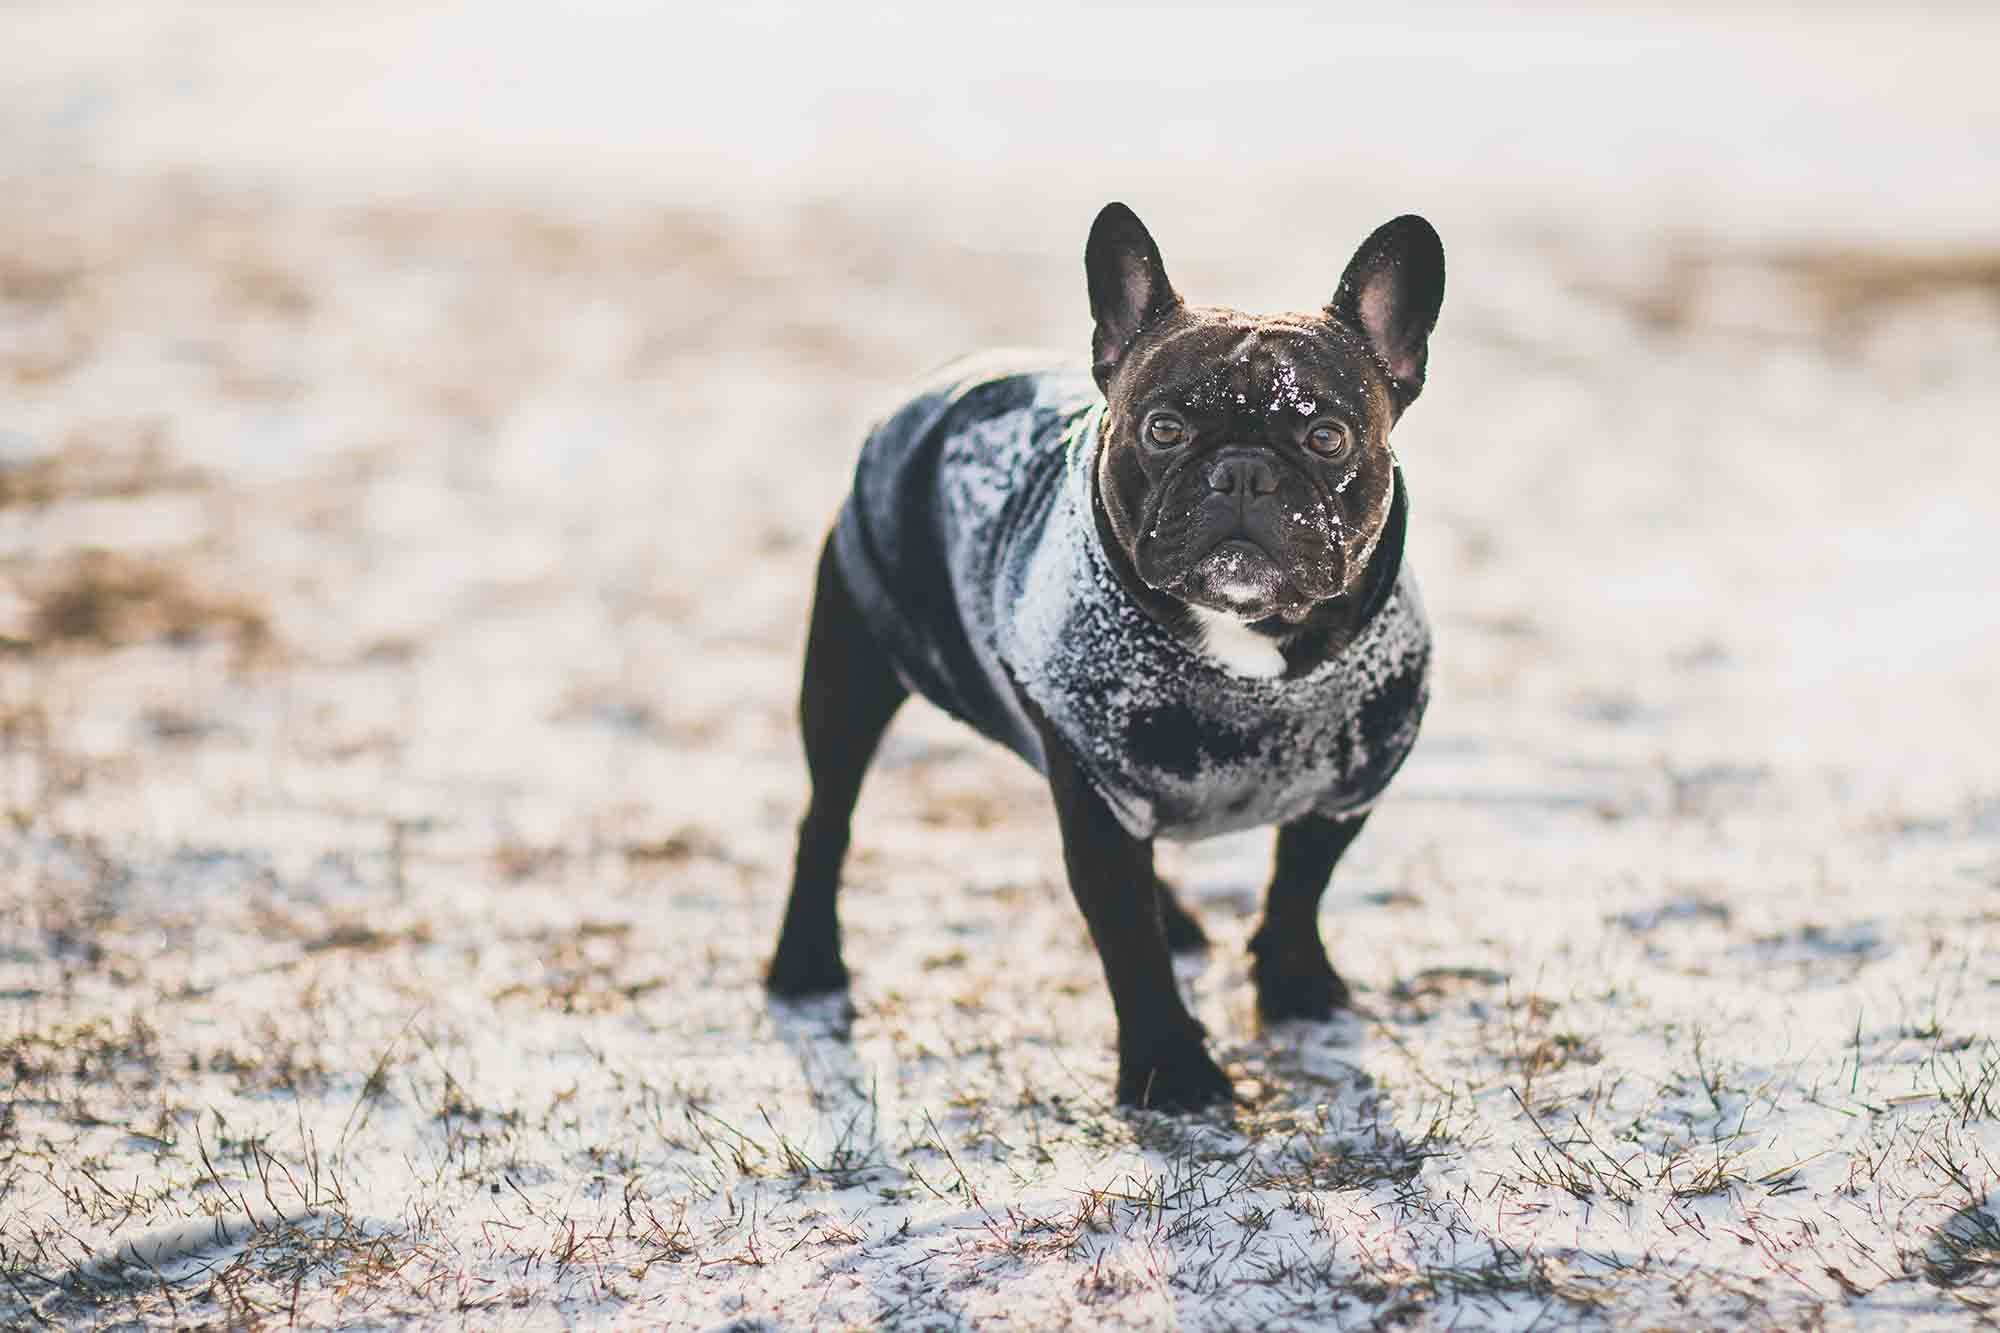 Black French Bulldog outside in the snow with a black sweater on